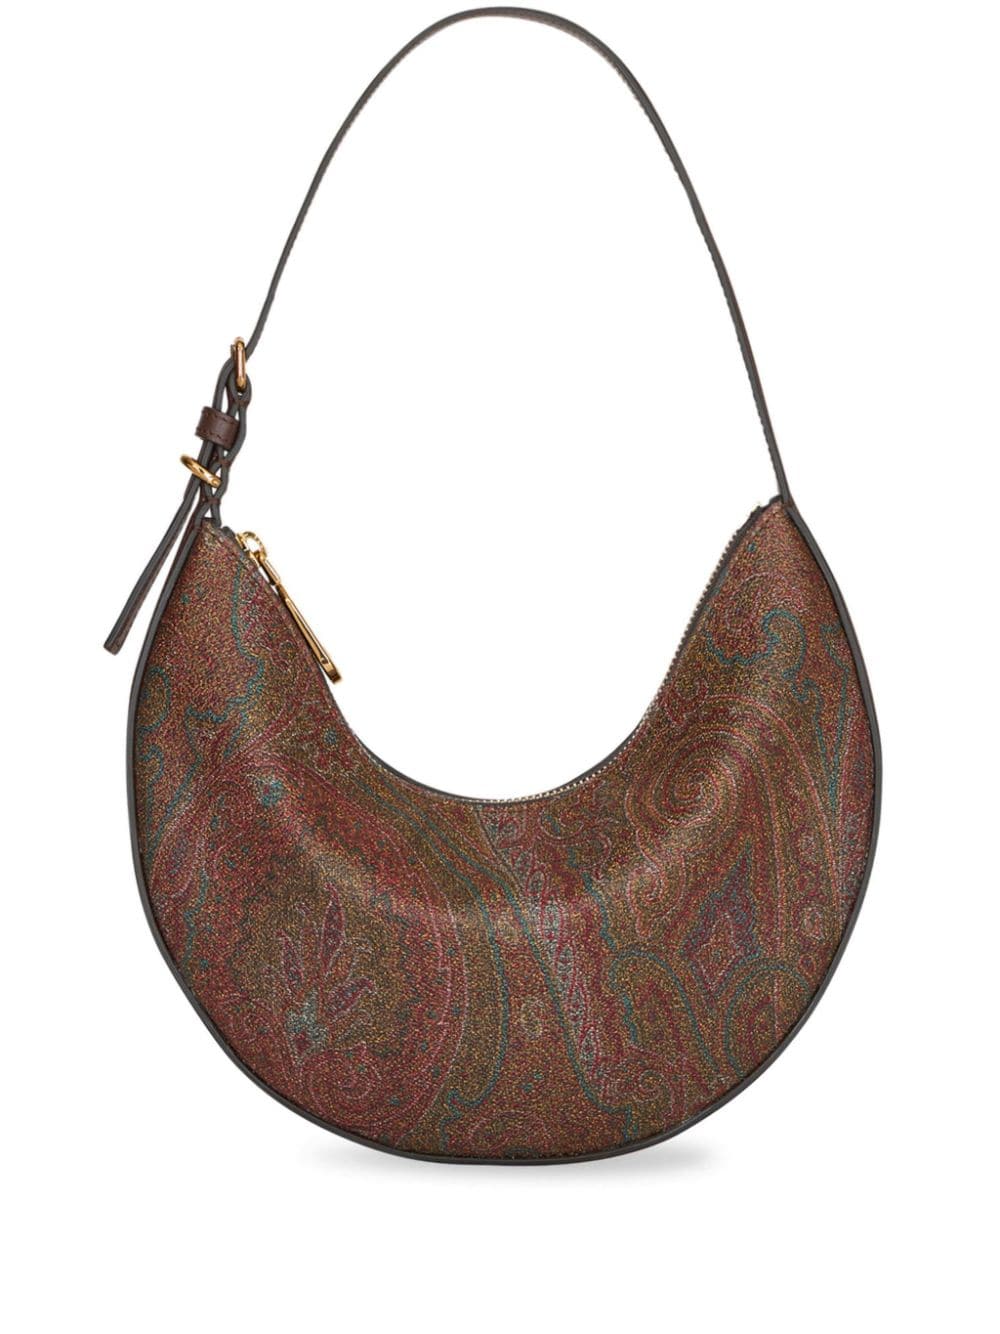 ETRO Brown Multicolor Paisley Print Small Hobo Shoulder Bag with Gold-Tone Hardware